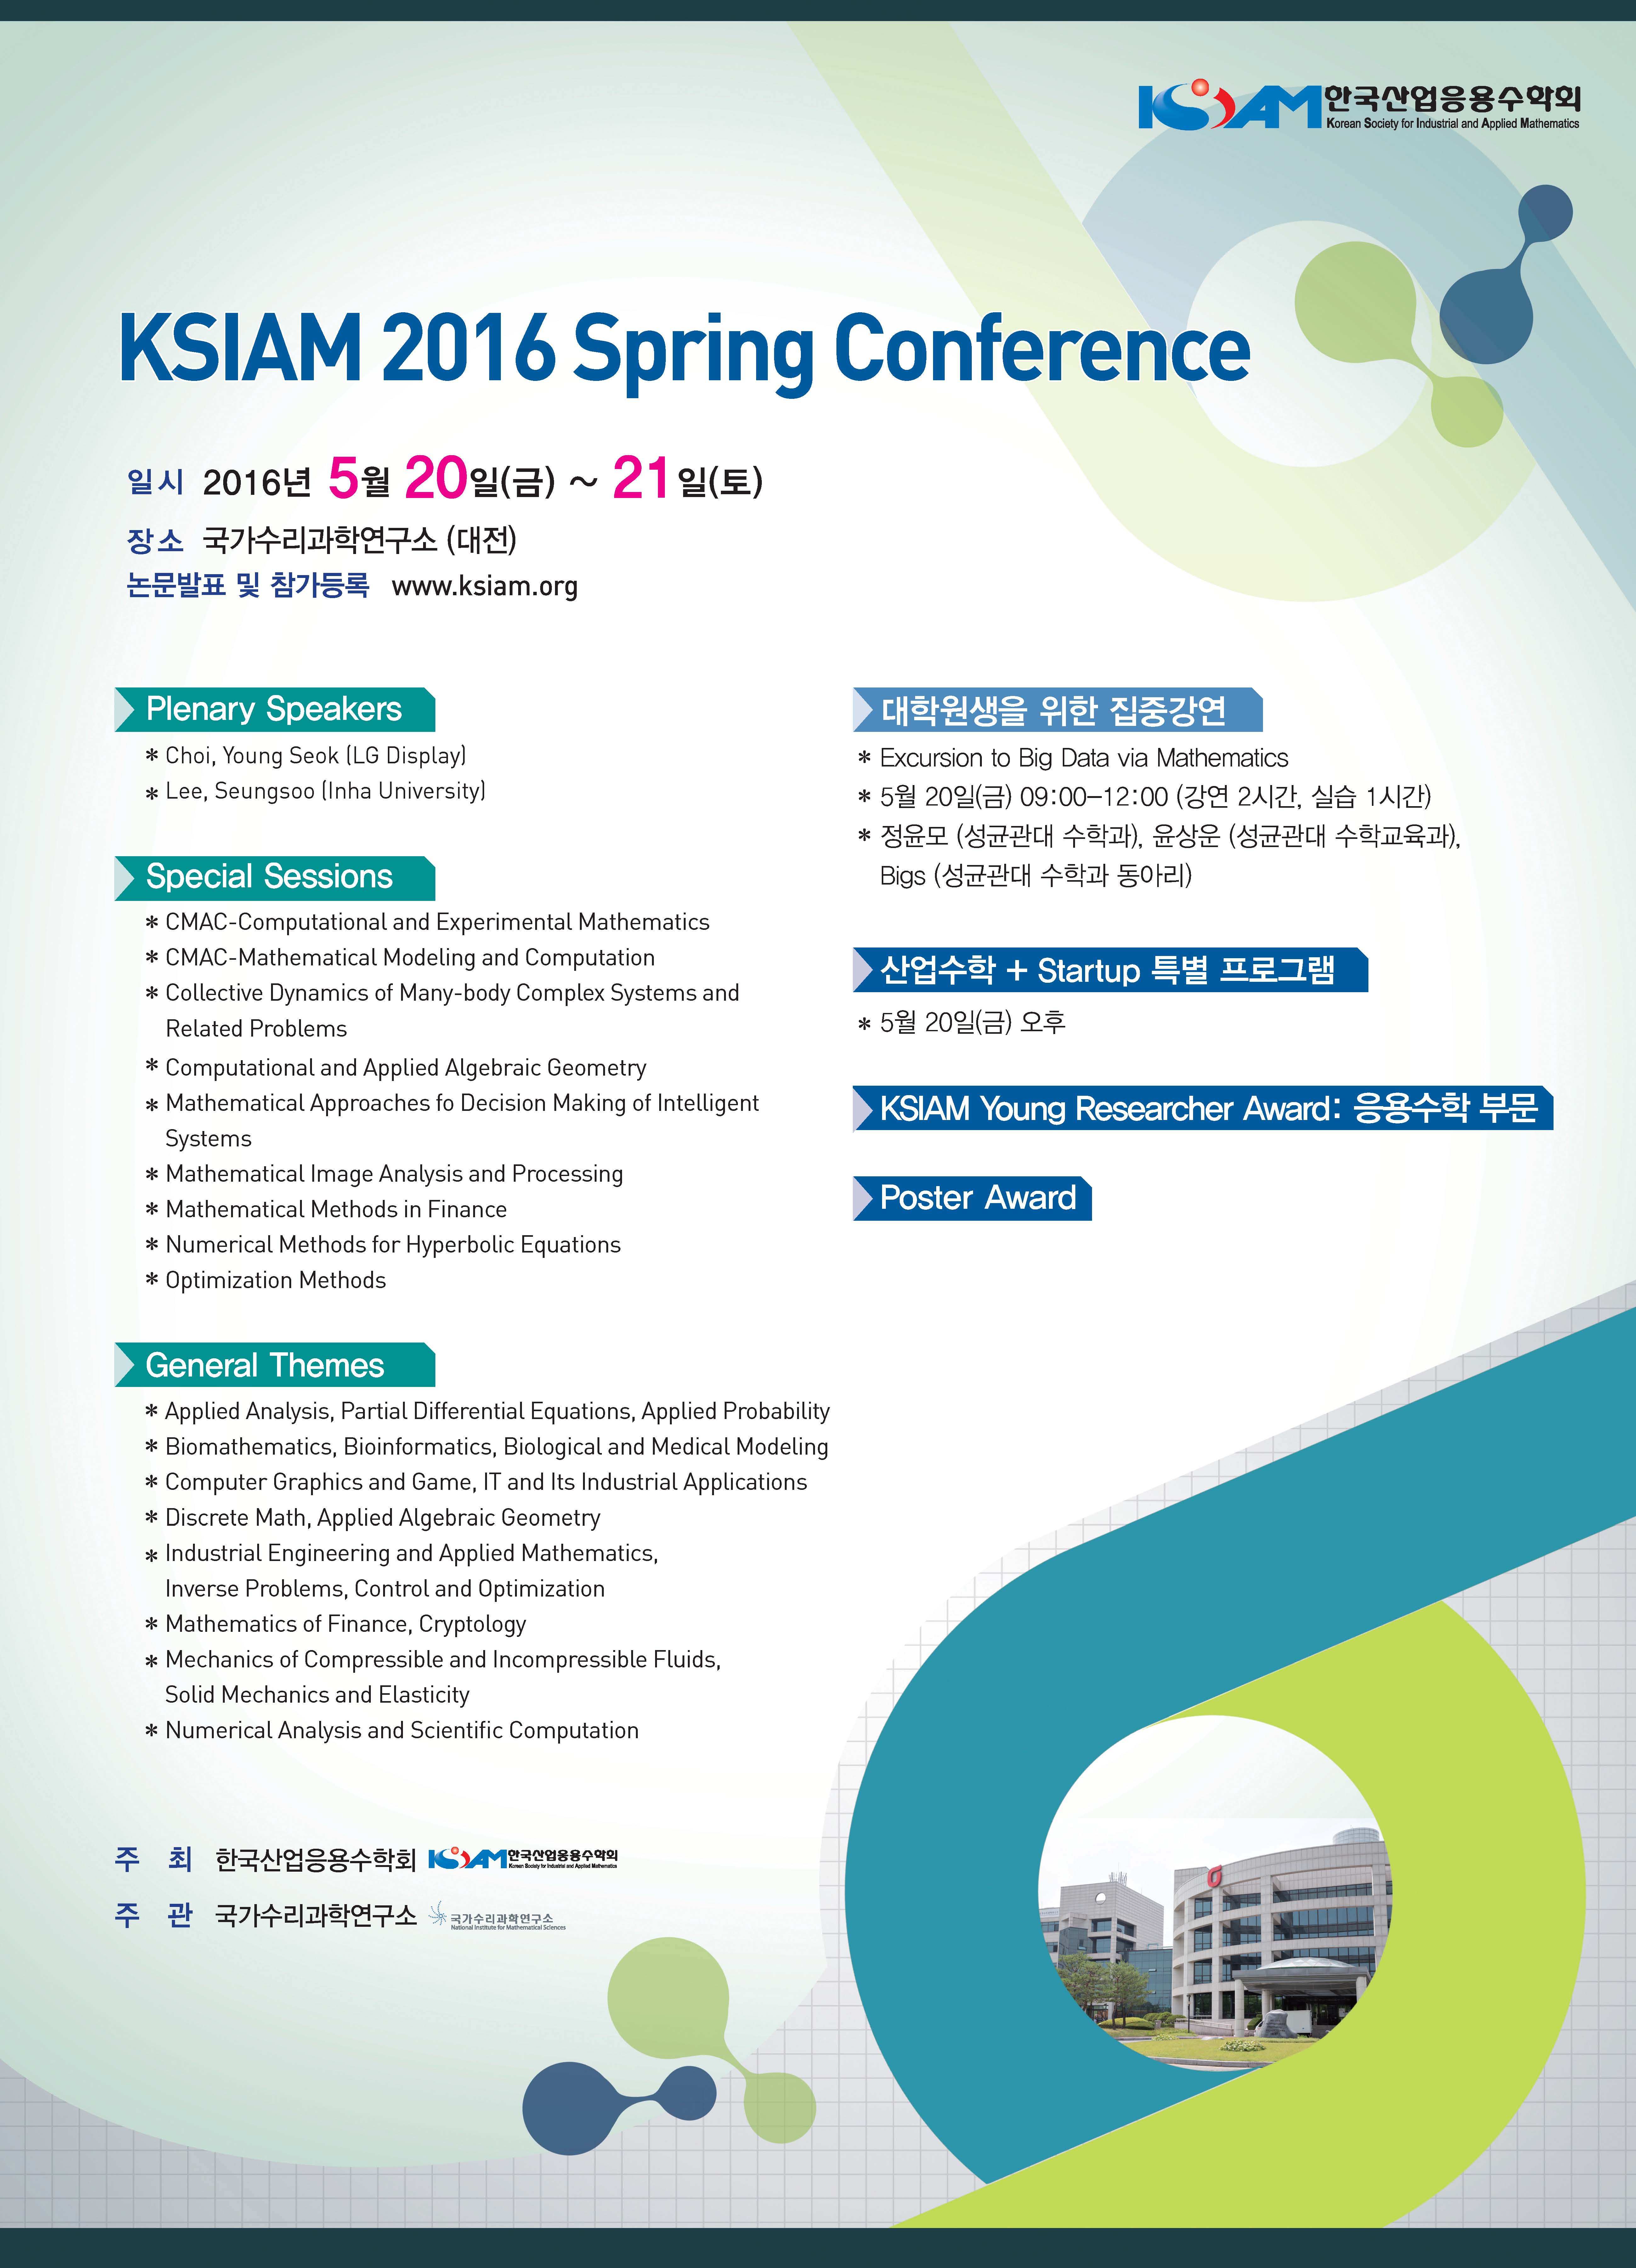 KSIAM 2016 Spring Conference. 자세한 내용은 본문 참조